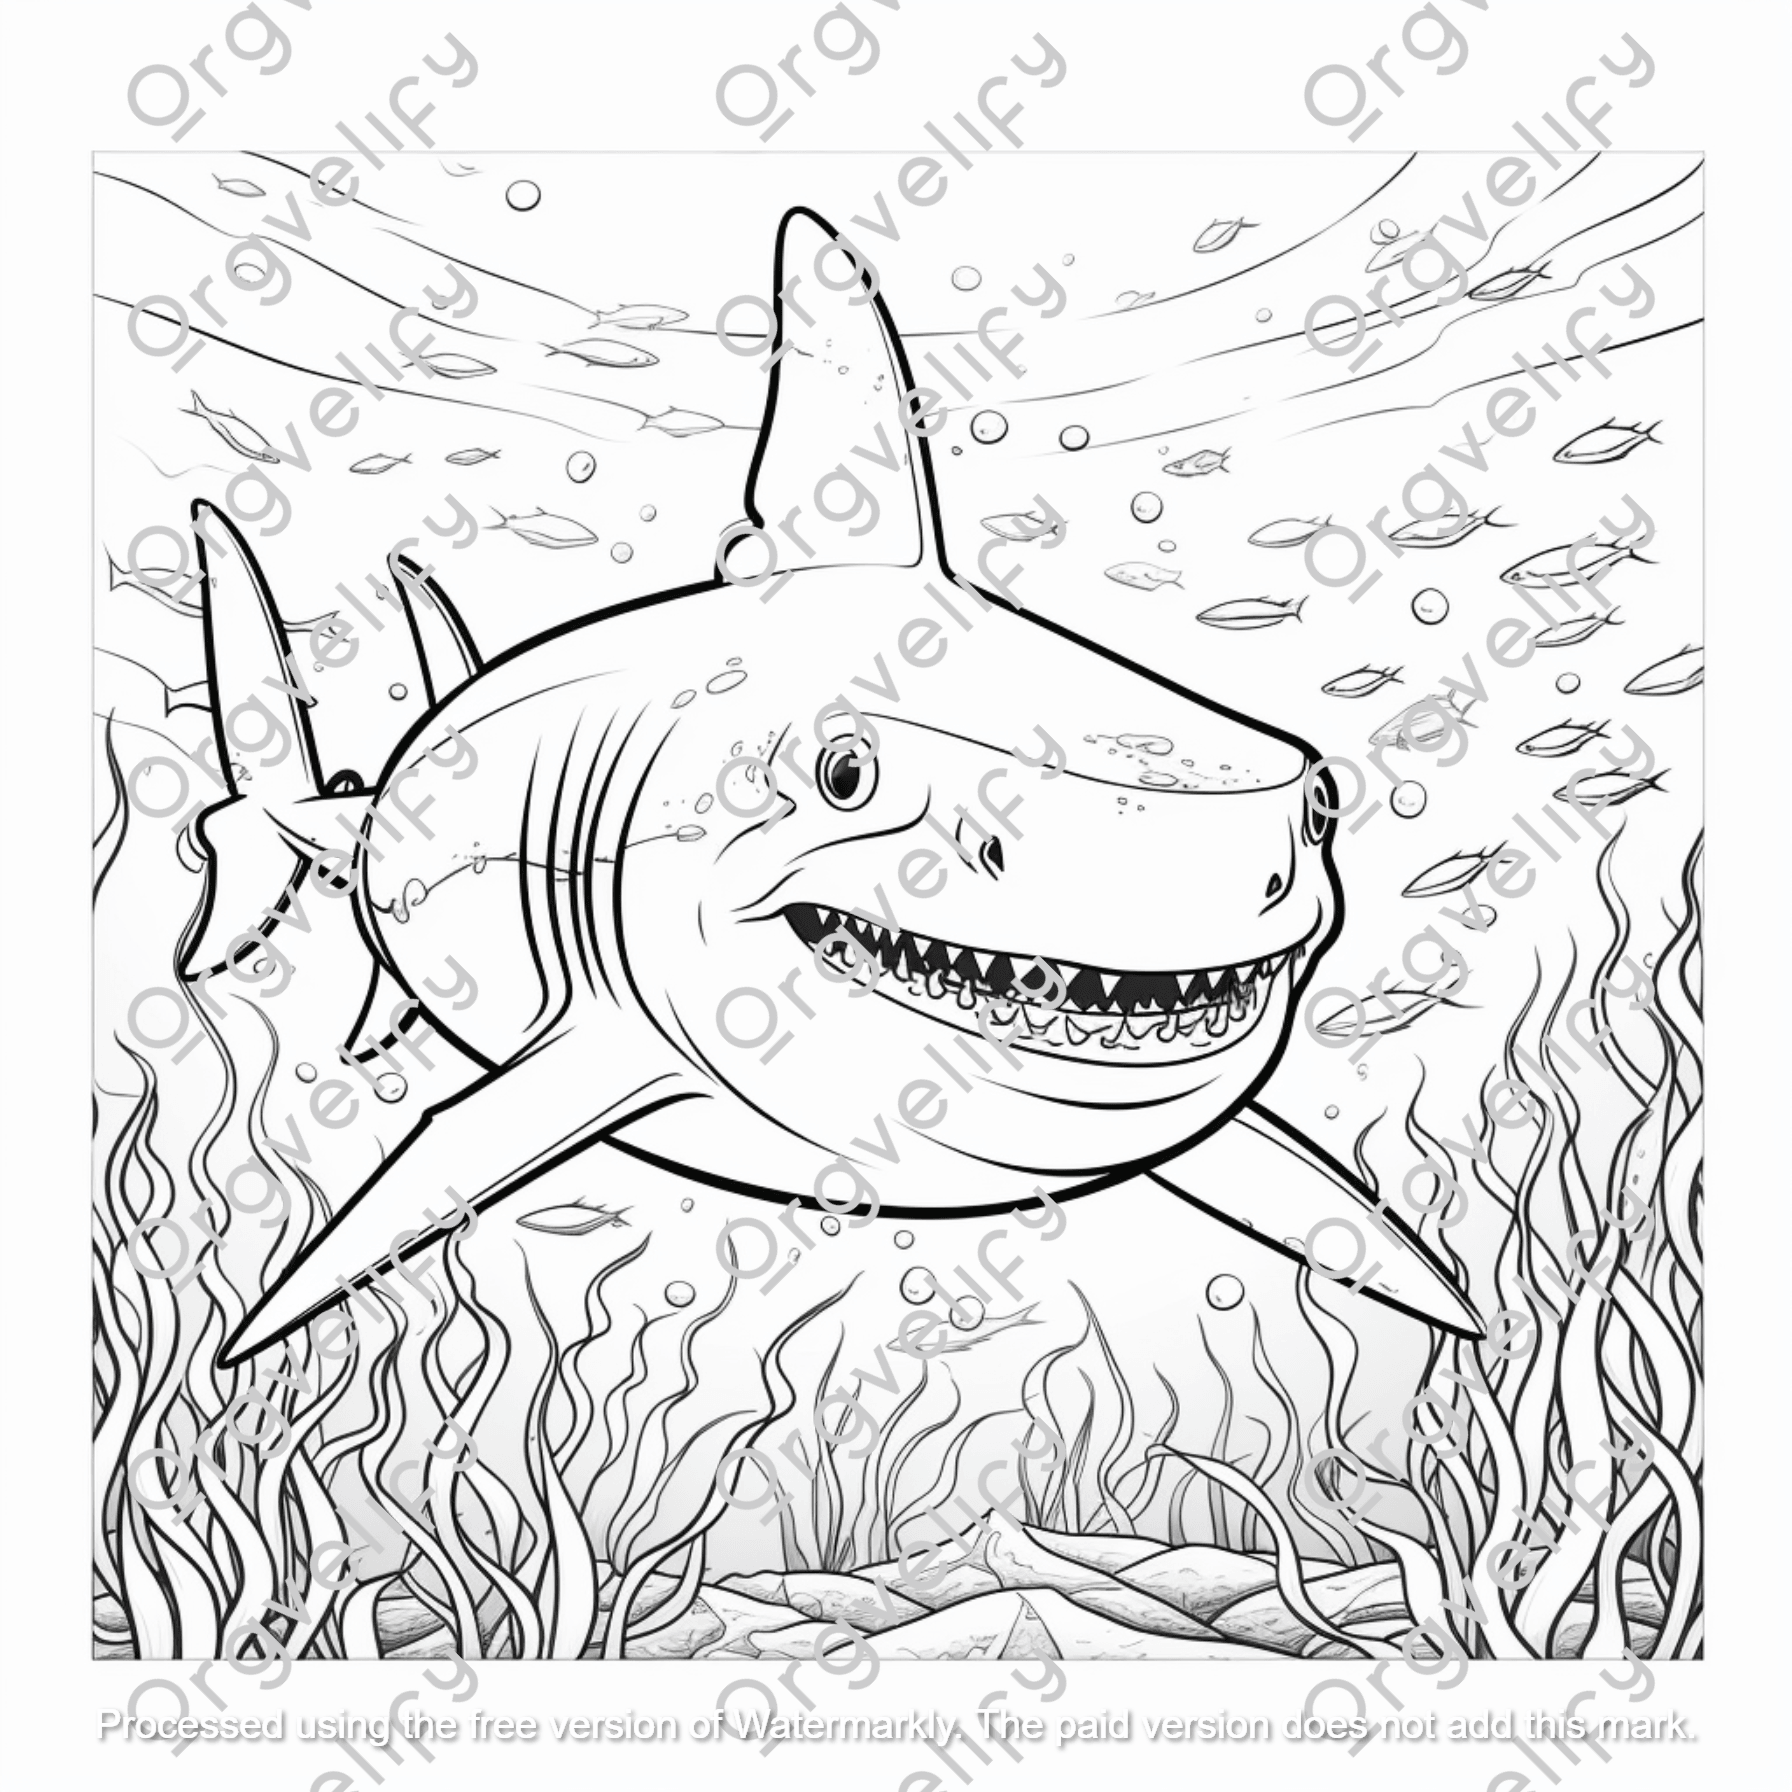 All About Sharks Coloring Book - Orgvelify